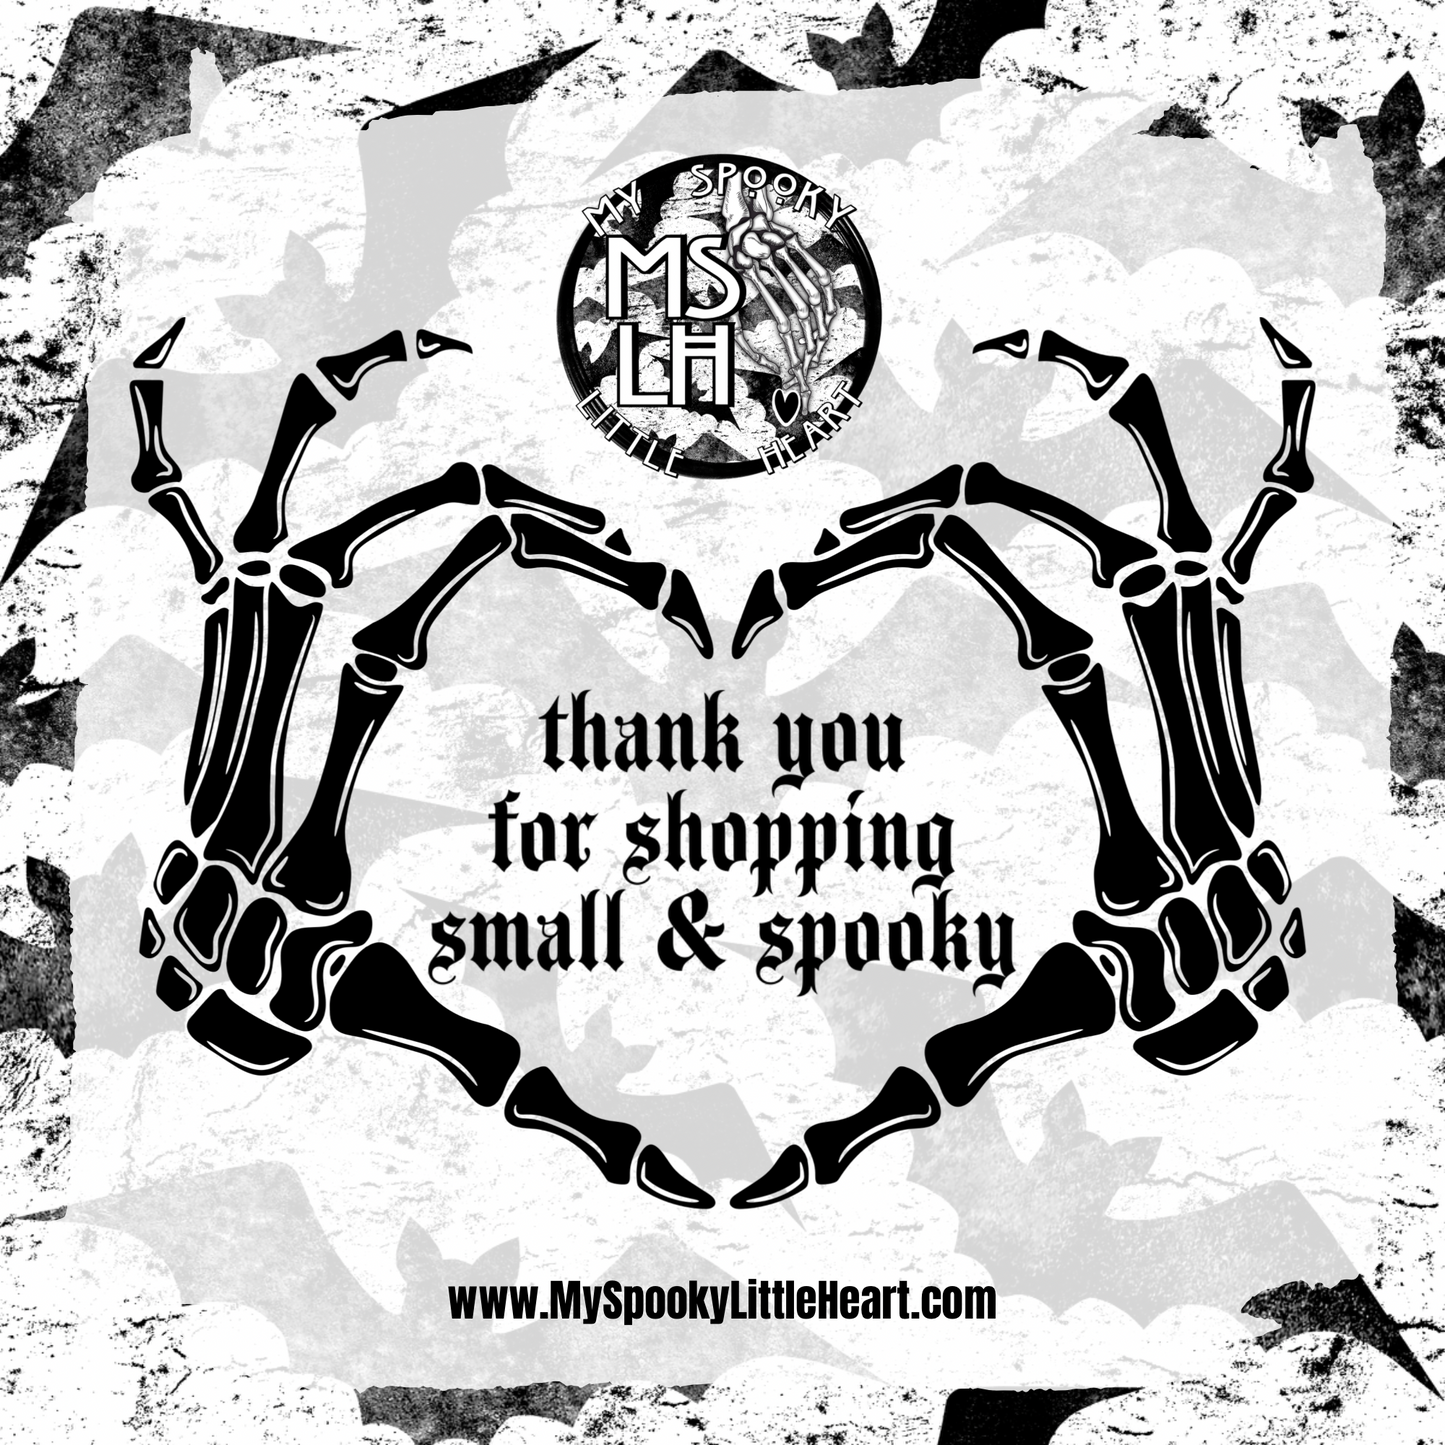 Have the day you deserve skeleton peace hand Vinyl Decal